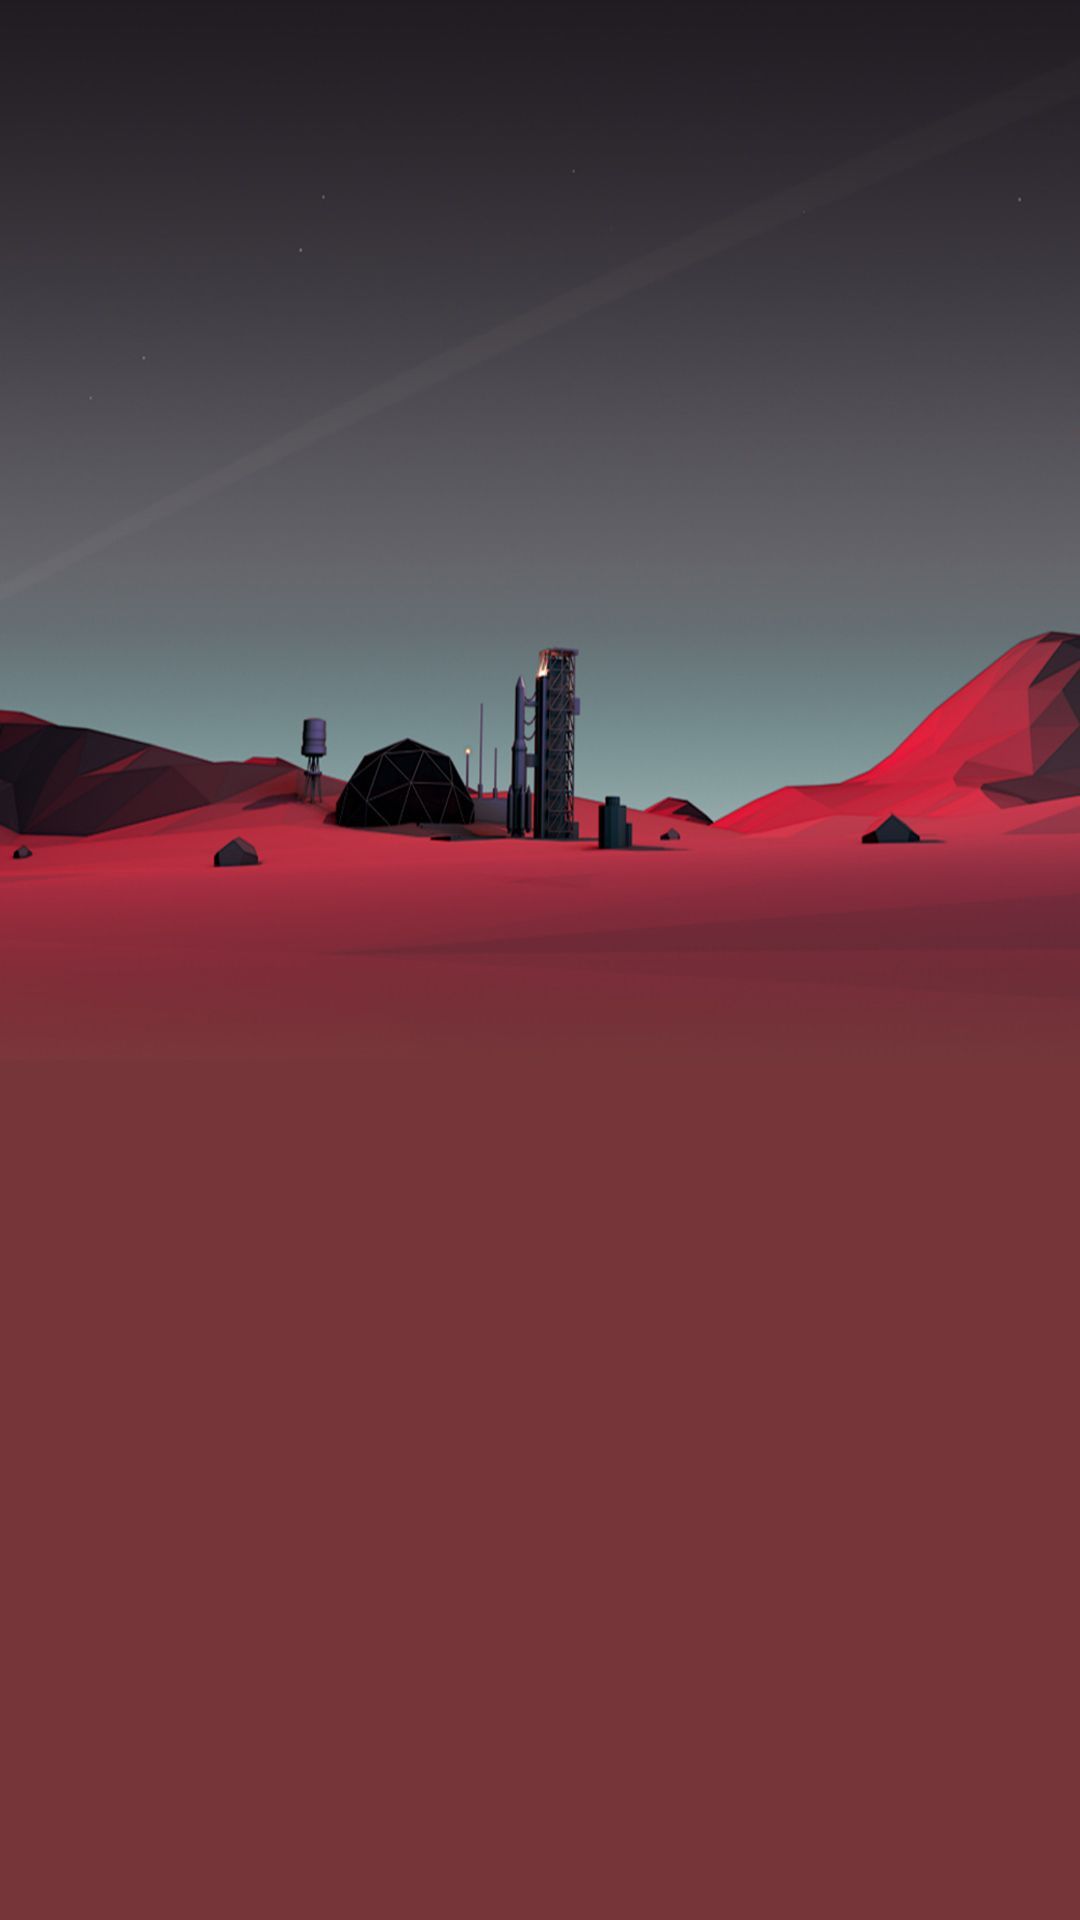 A city on a red planet, with tall buildings and an atmosphere. - Mars